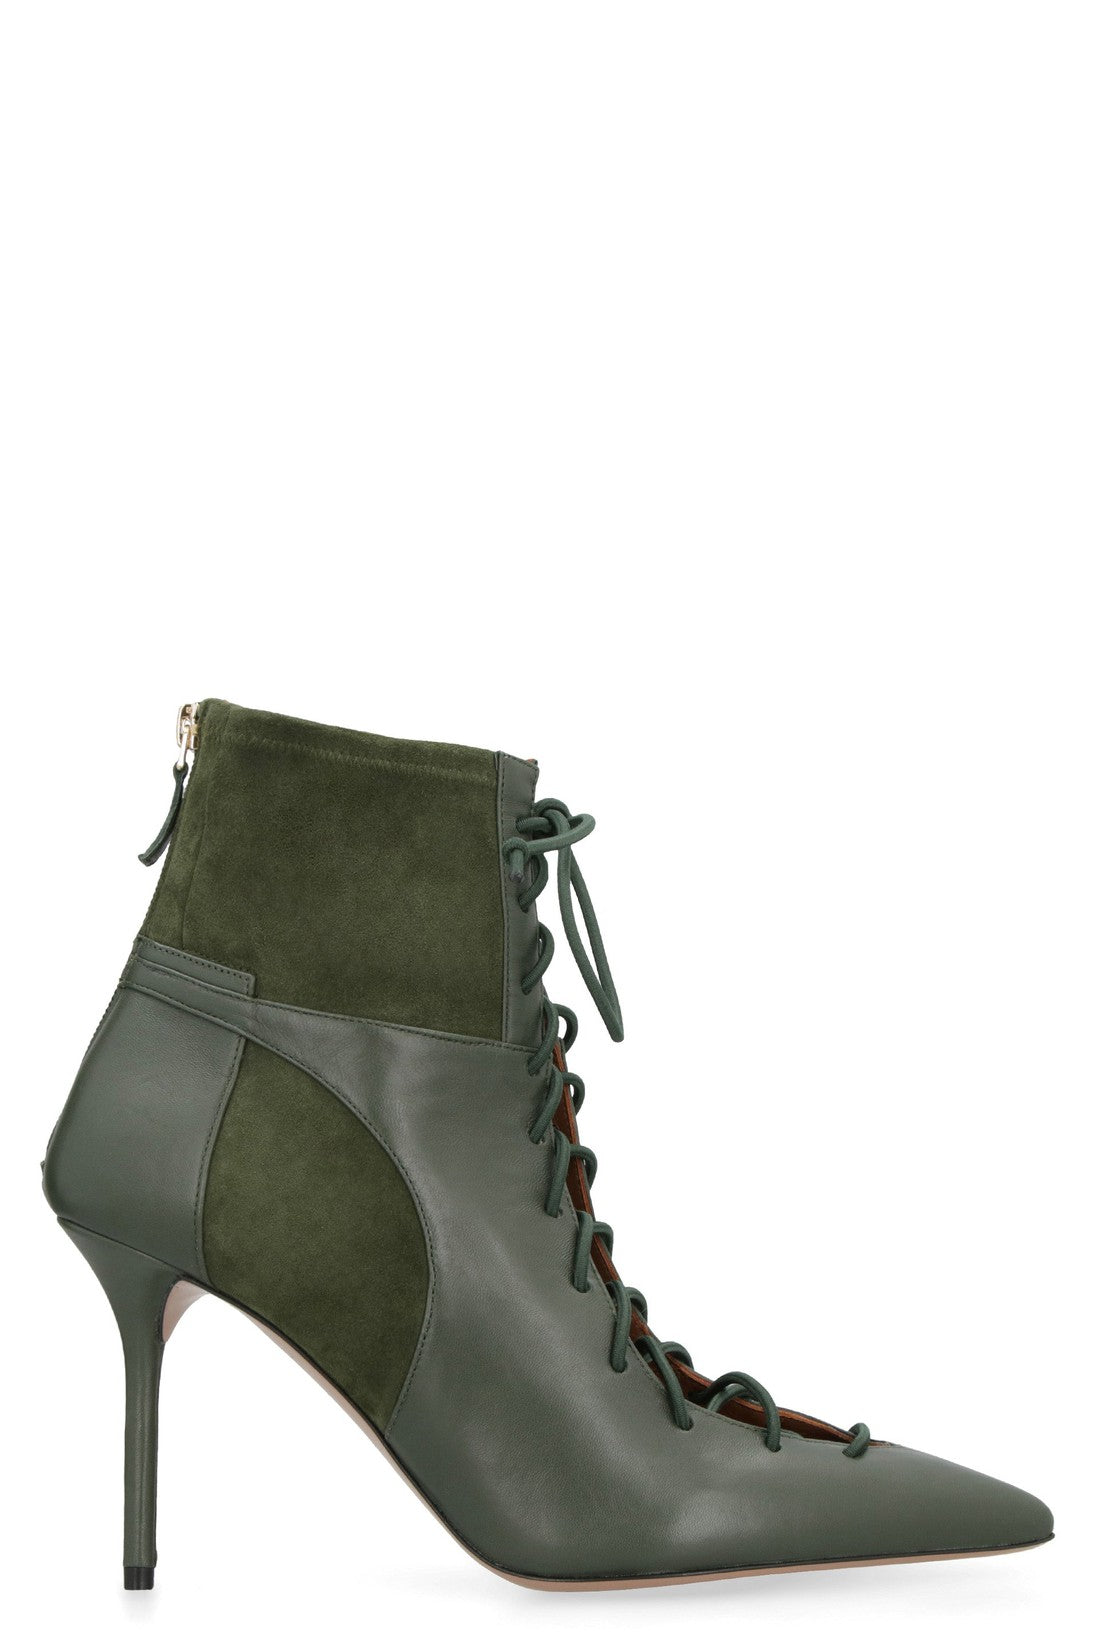 Malone Souliers-OUTLET-SALE-Montana suede ankle boots-ARCHIVIST